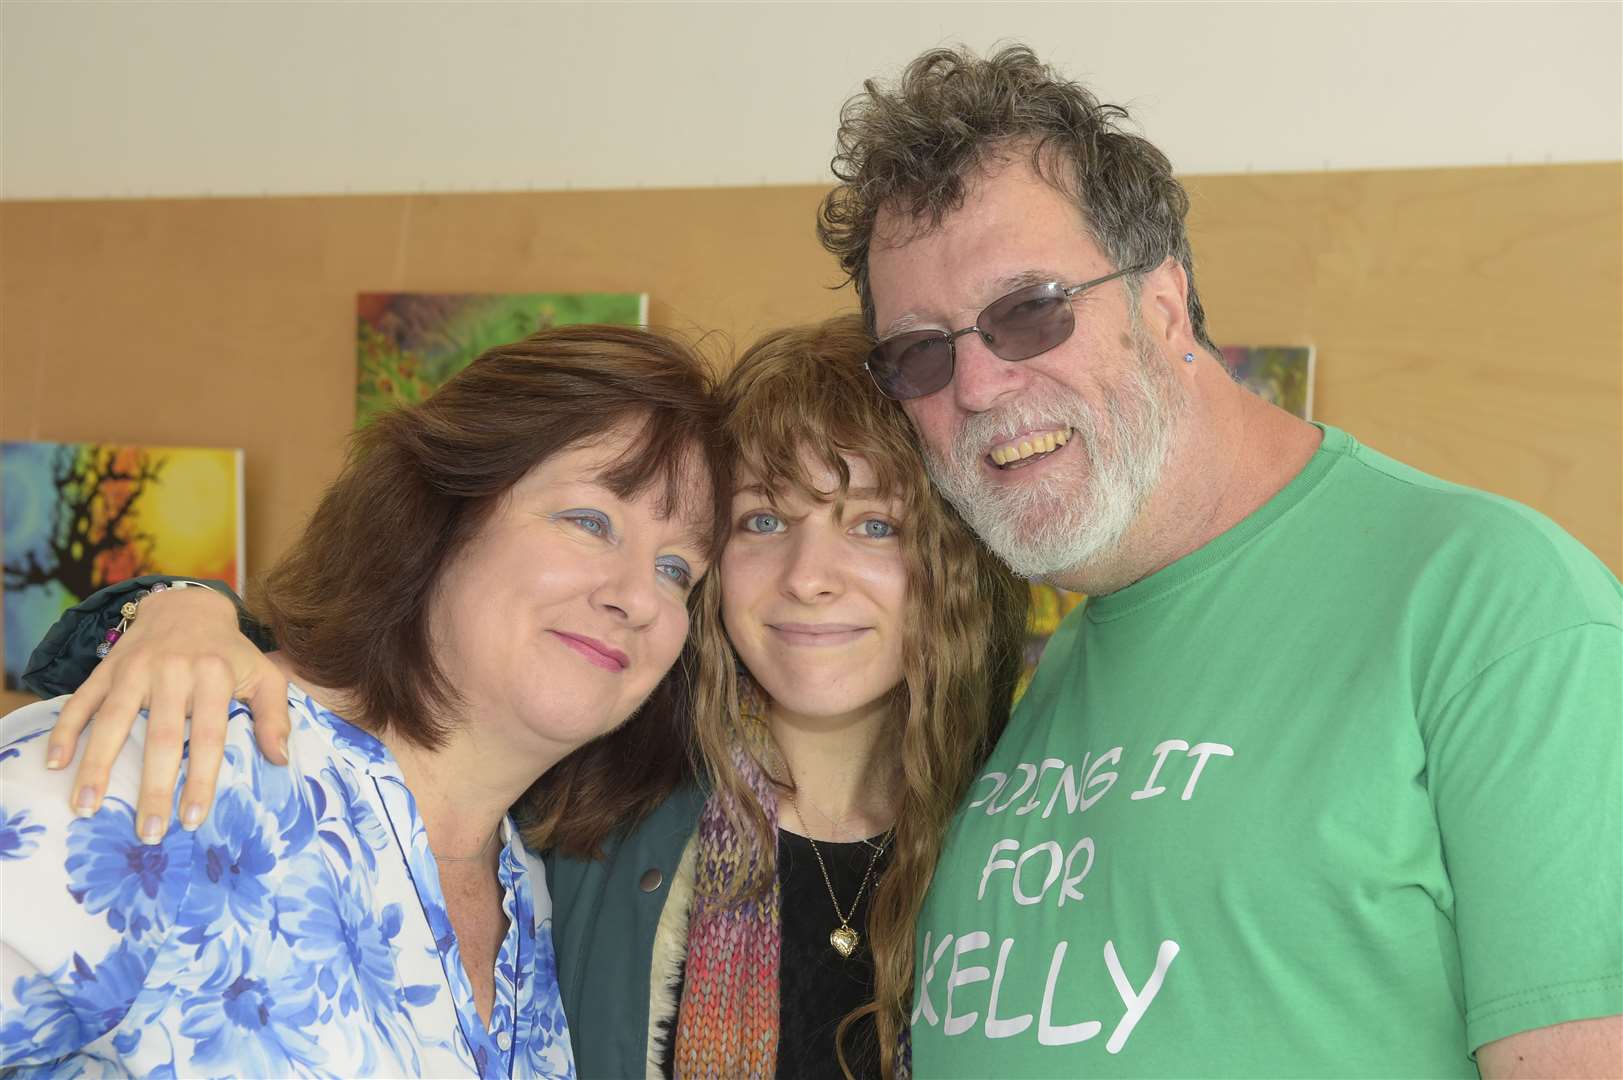 Kelly with her parents Linda and Martin, October 2016. Picture: Tony Flashman for KMG